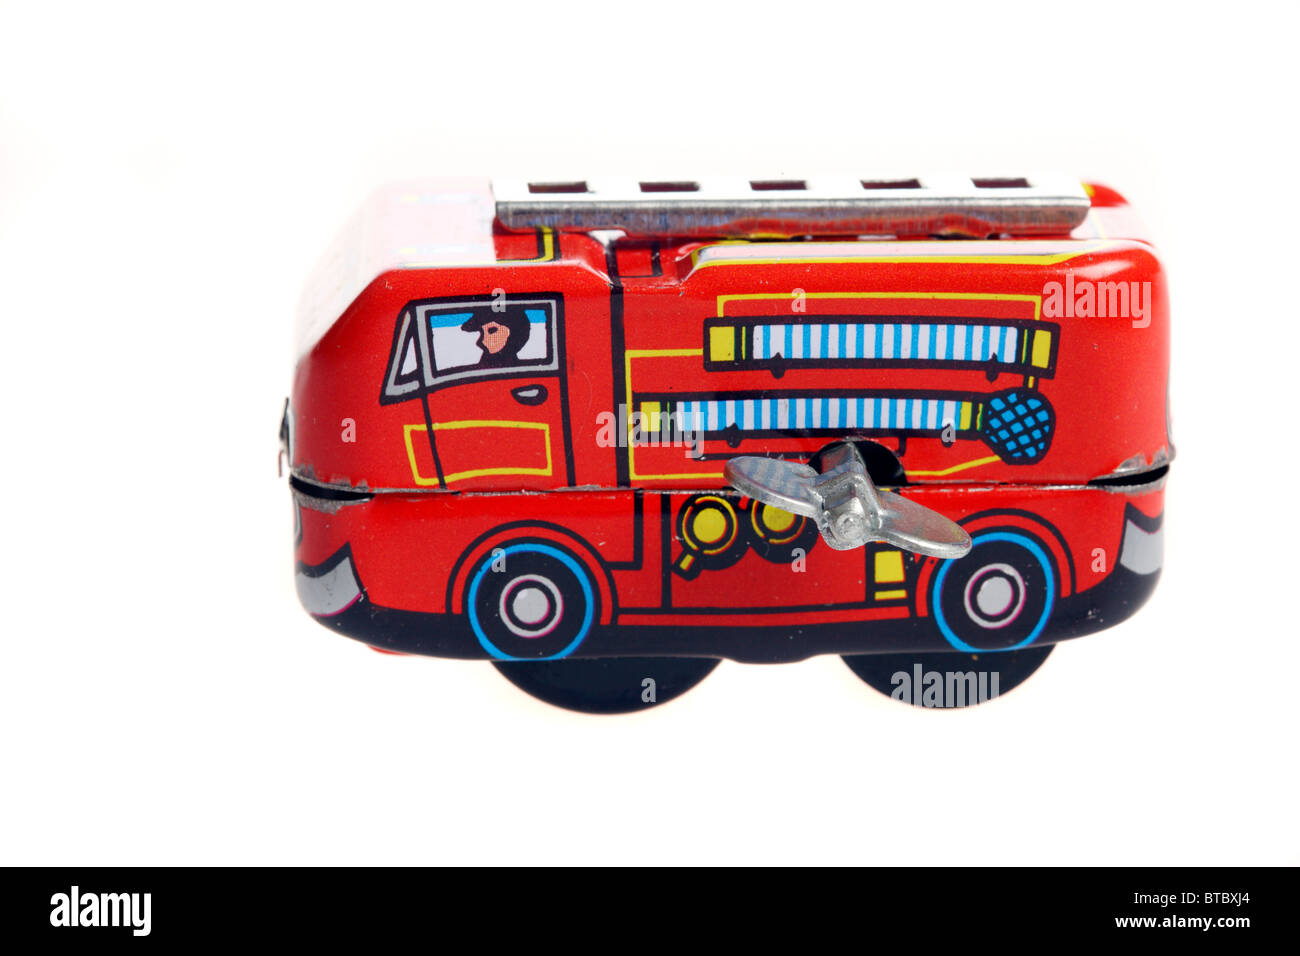 Tin toy, fire engine, wind up motor by a metal key. Stock Photo